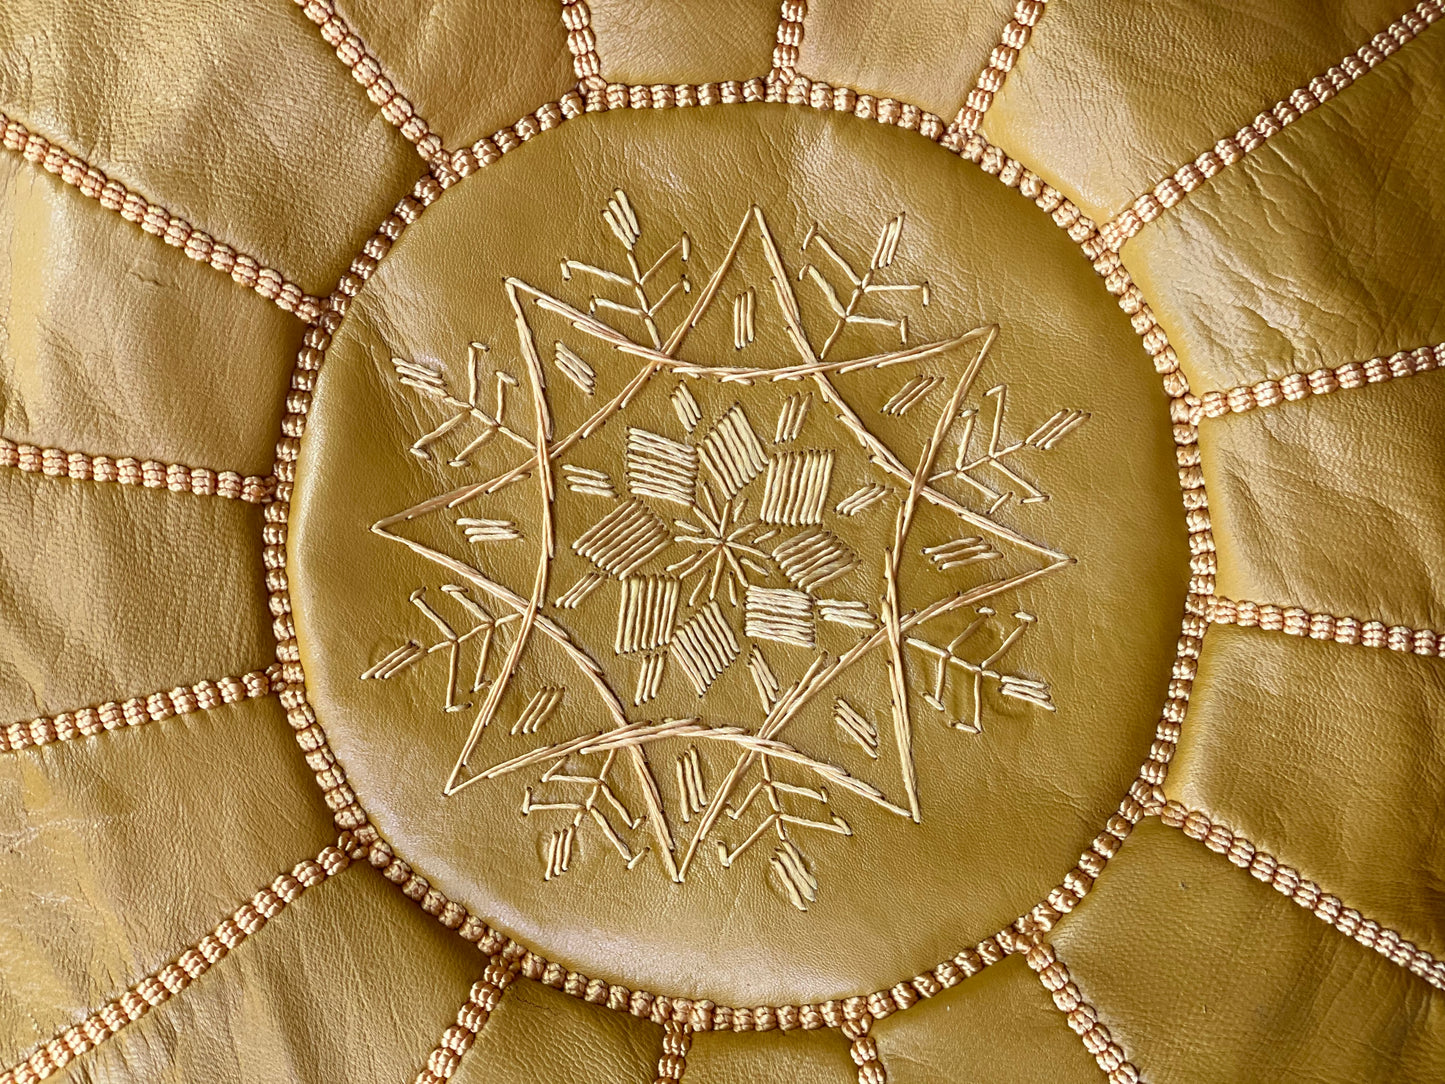 MOROCCAN LEATHER POUF - Tadd-art